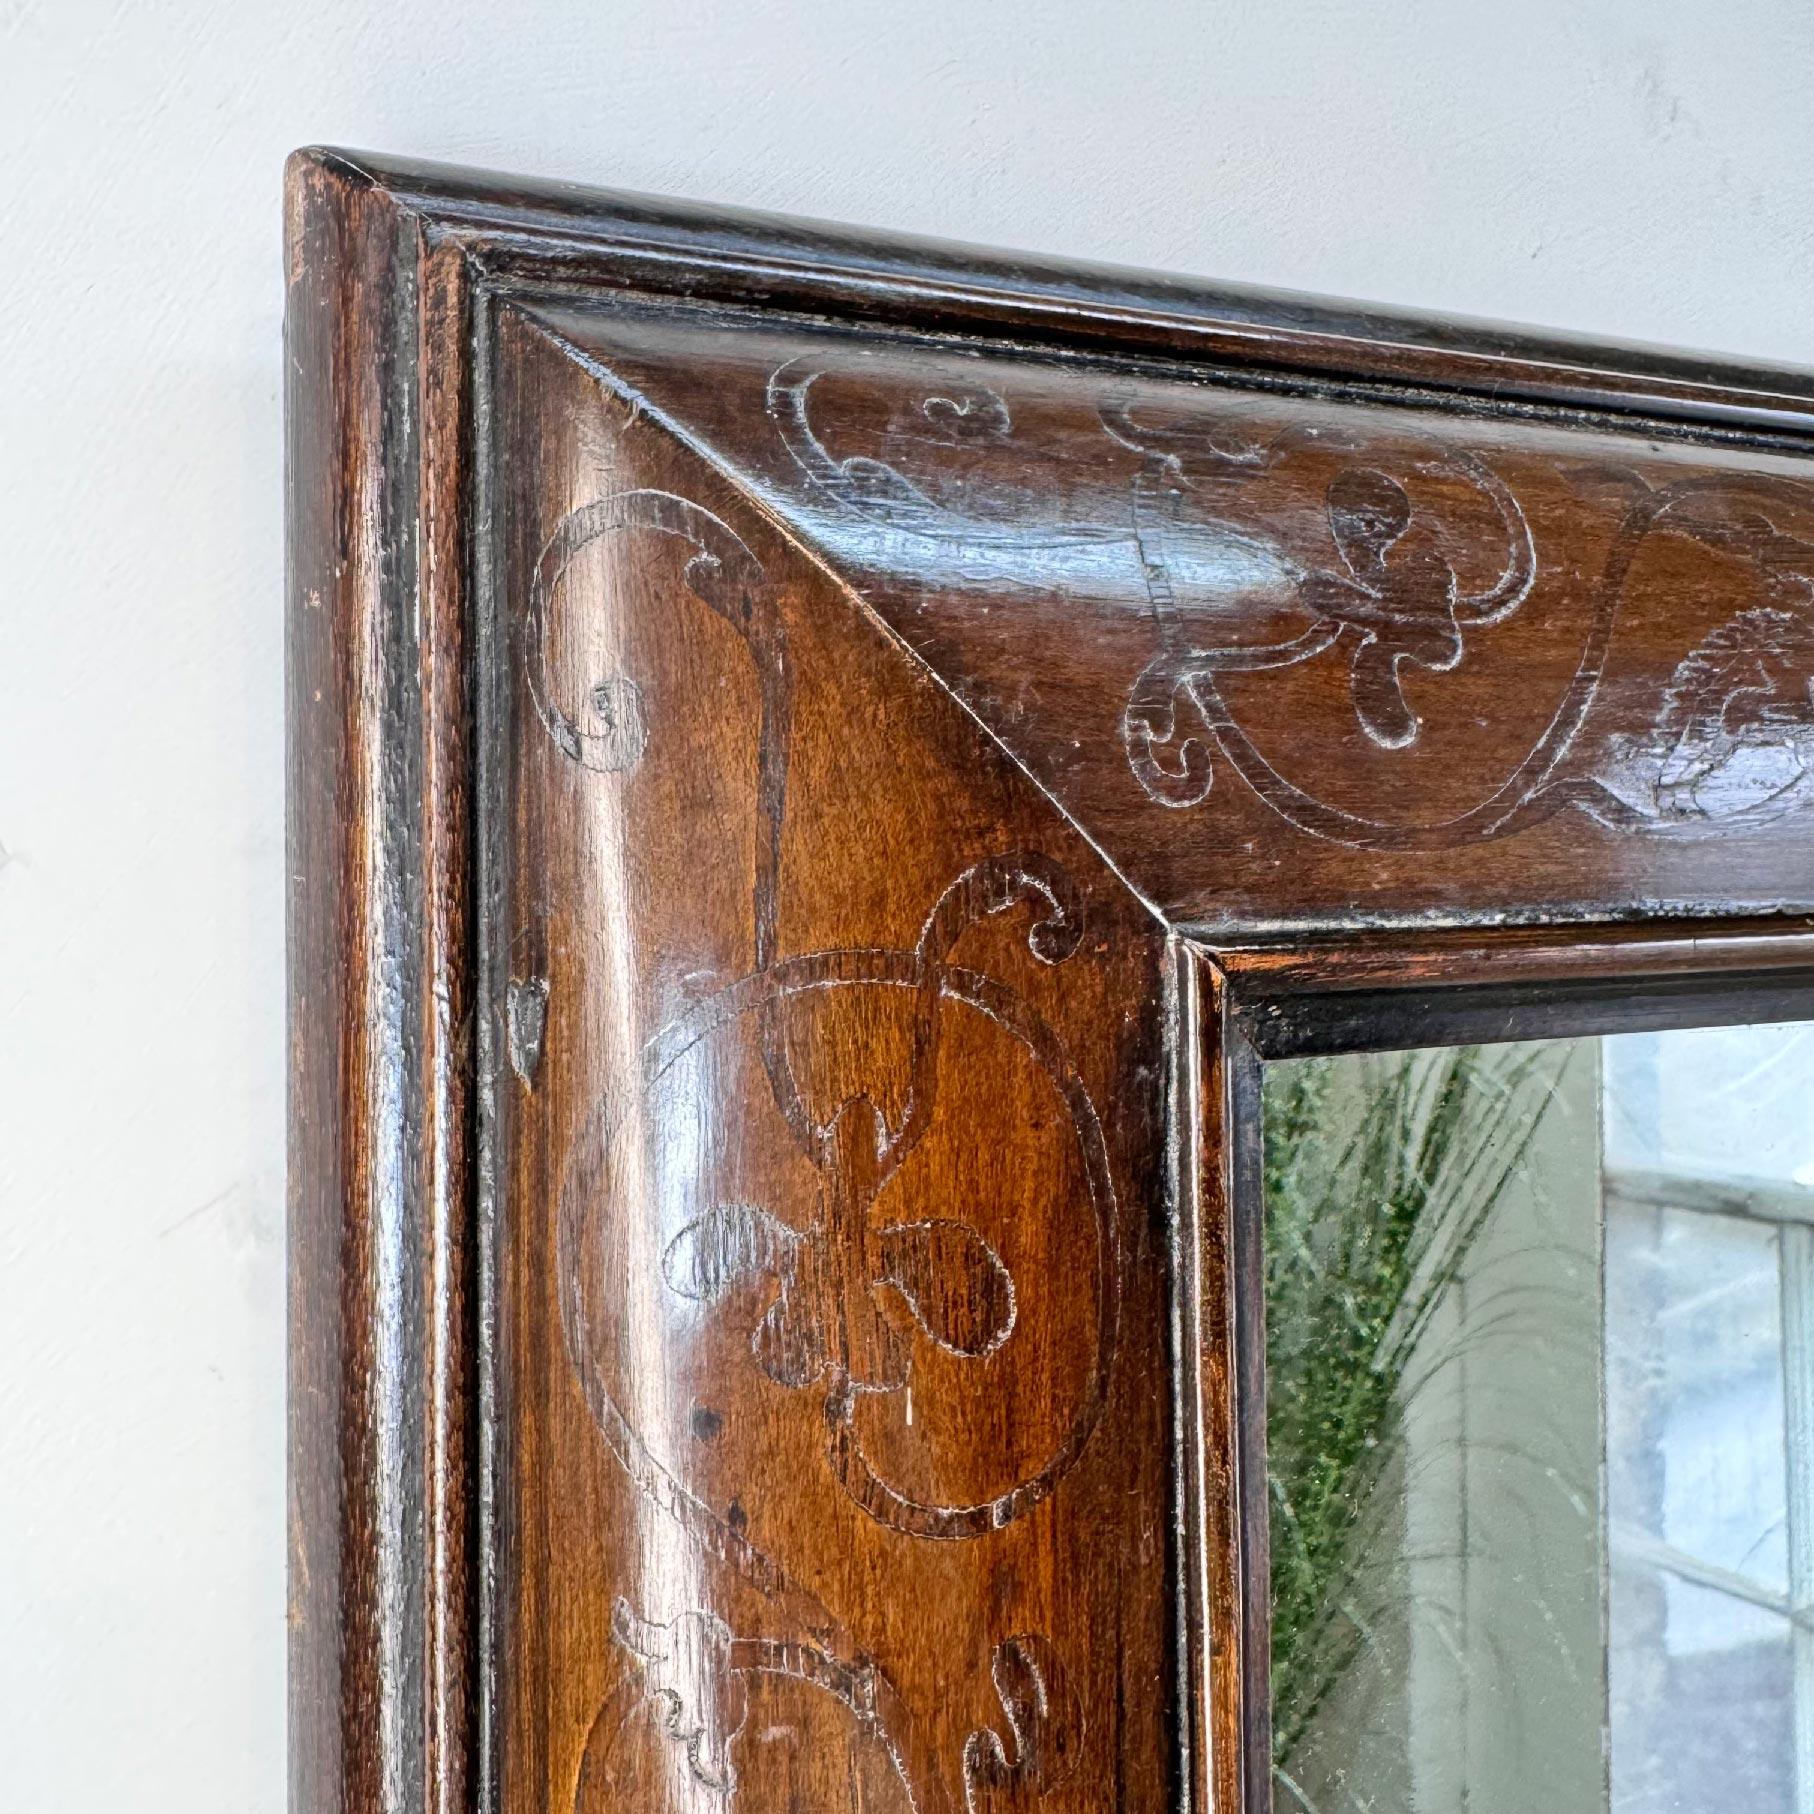 Exceptional 18th Century Marquetry Mirror in the William and Mary style For Sale 5